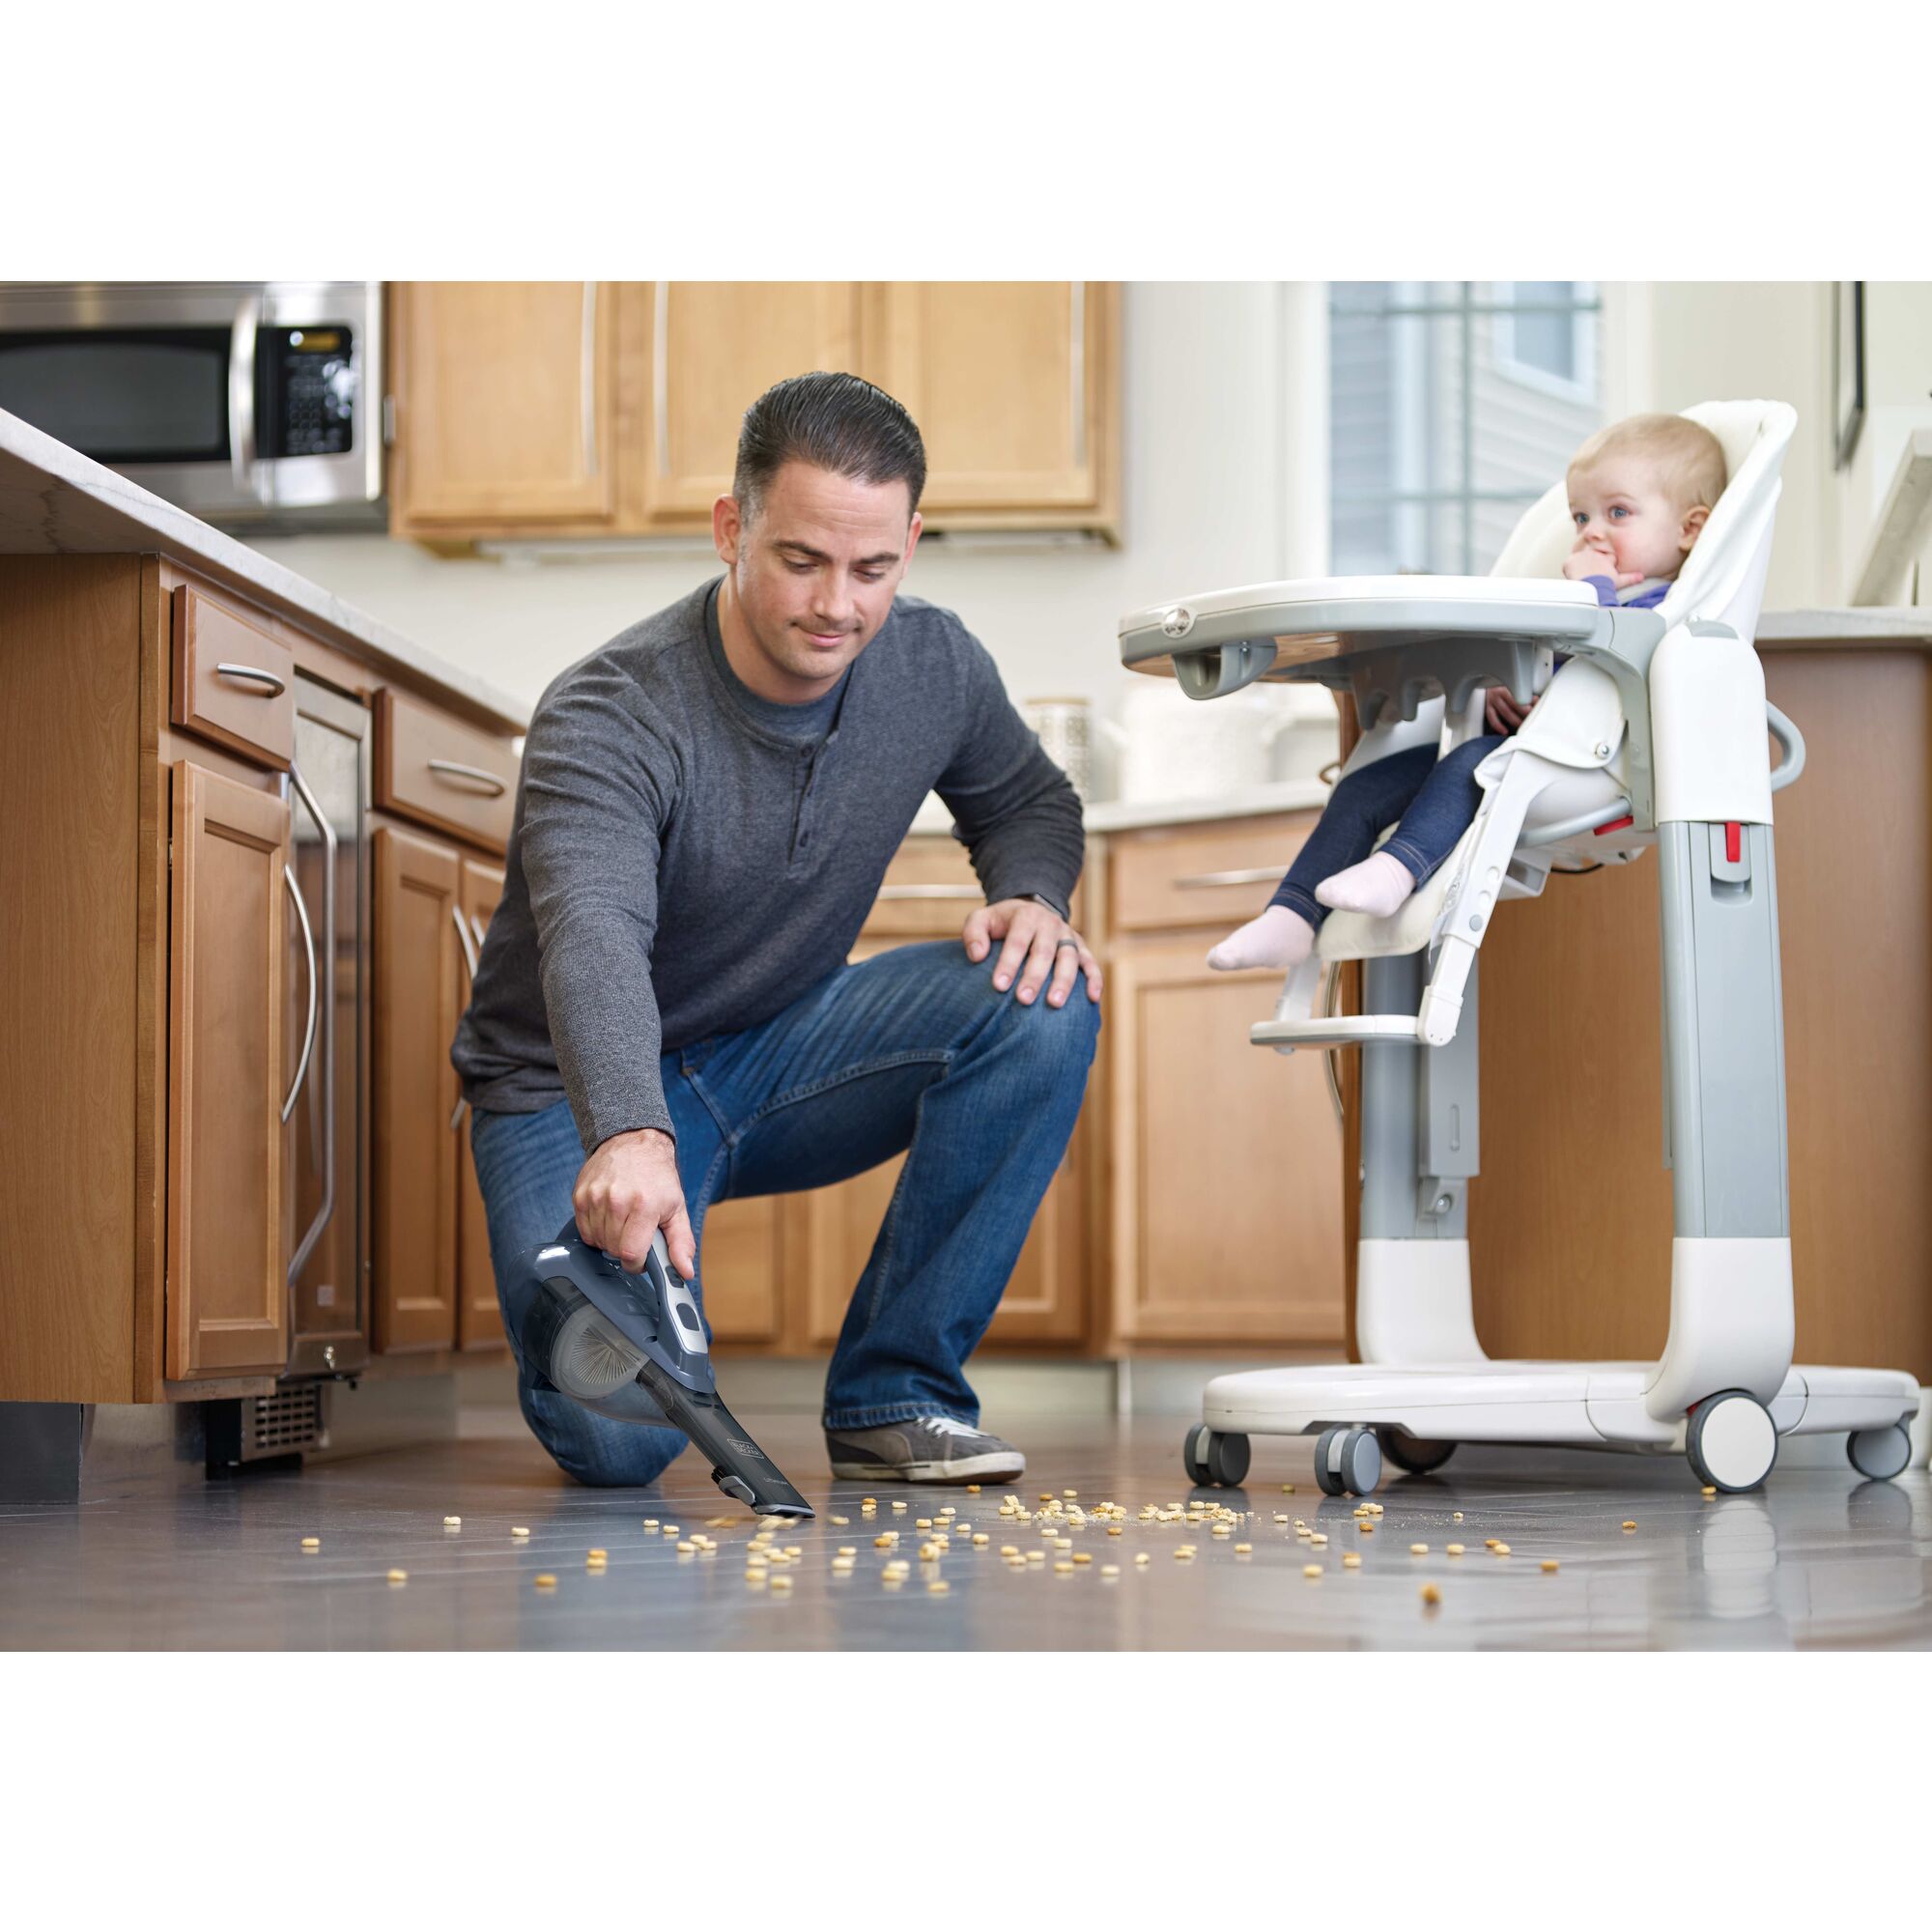 dustbuster Advanced Clean cordless hand vacuum being used by a person to clean floor.